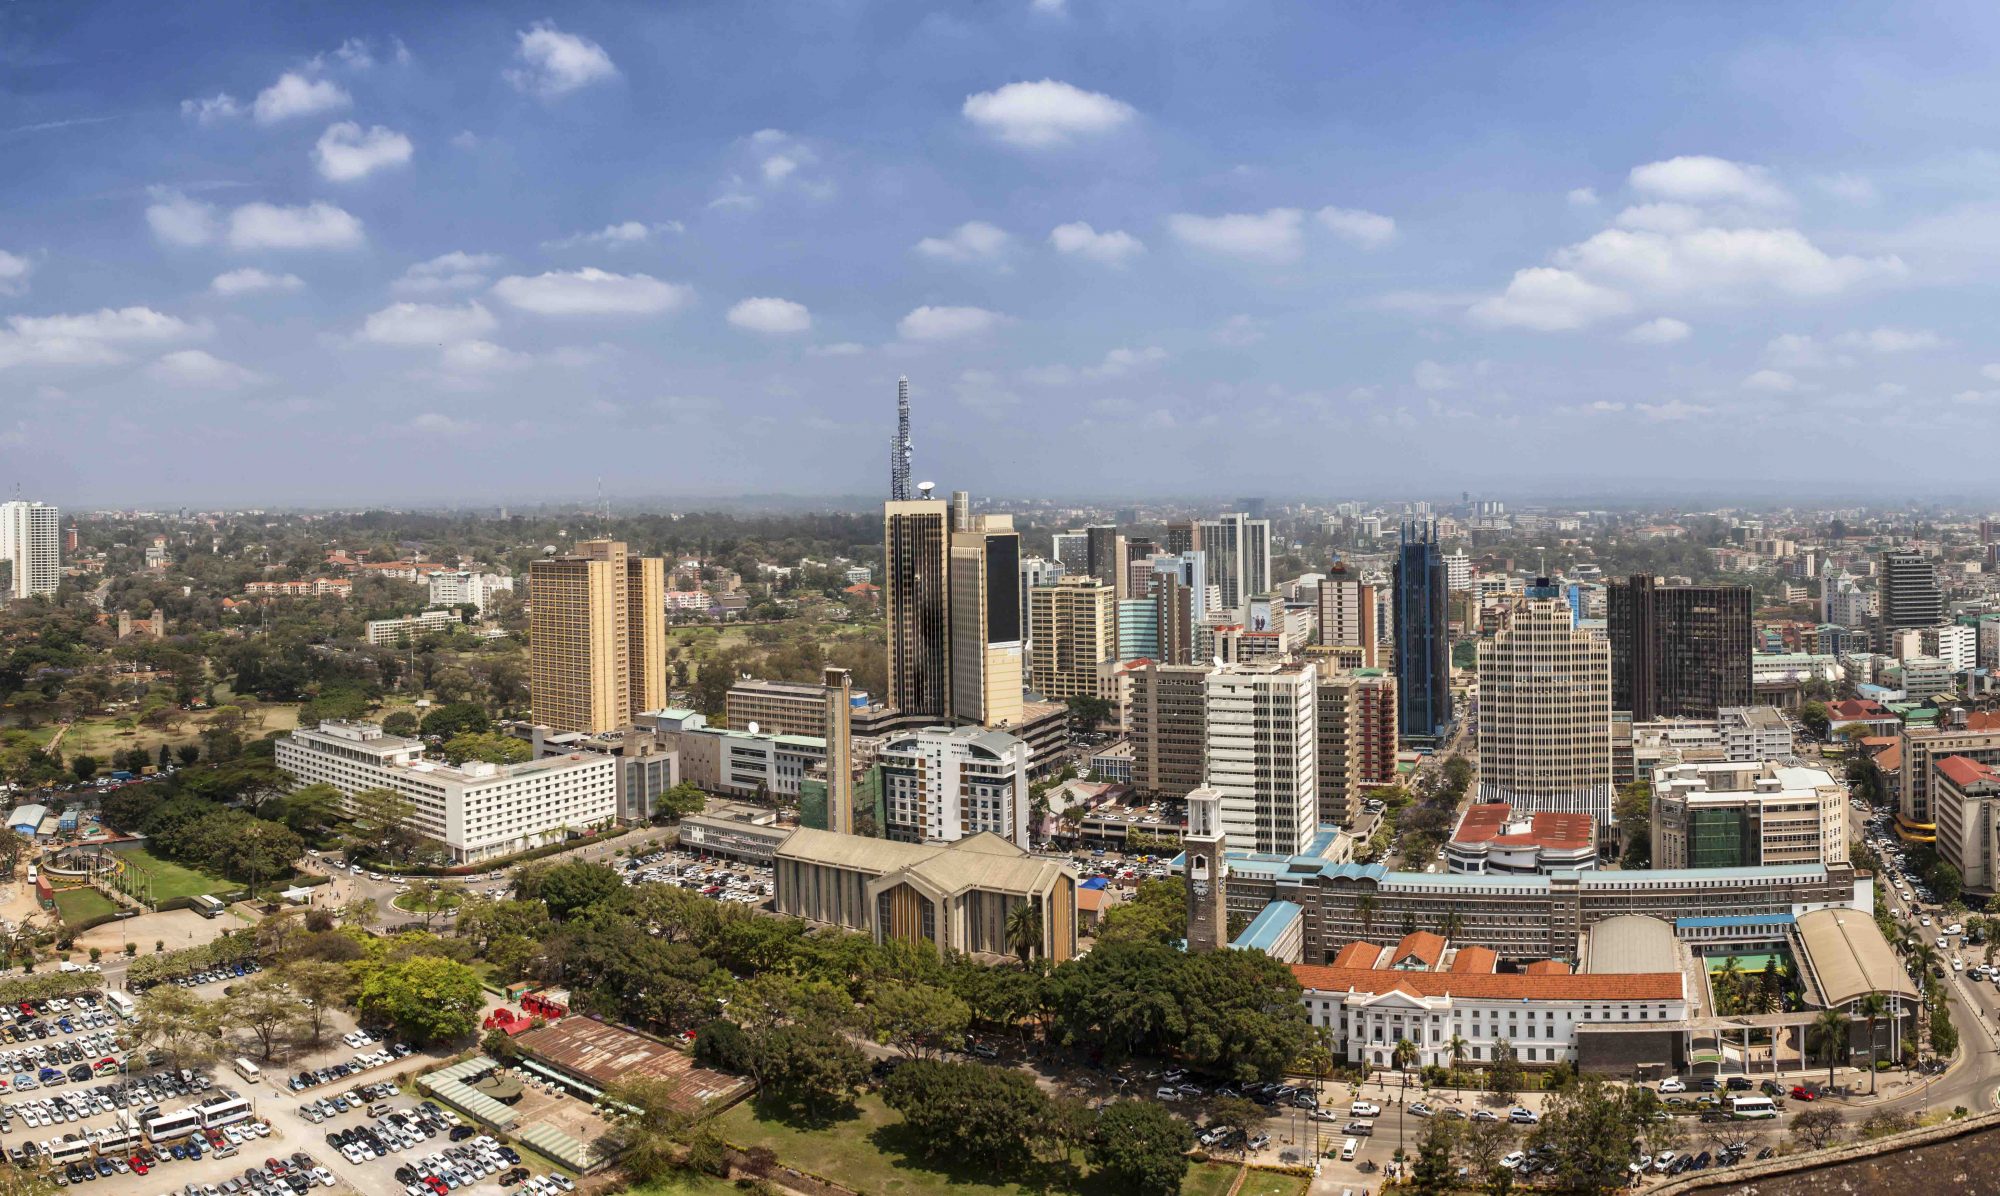 KENYA: PLANS TO ISSUE ANOTHER EUROBOND RAISE CONCERN OVER DEBT SUSTAINABILITY